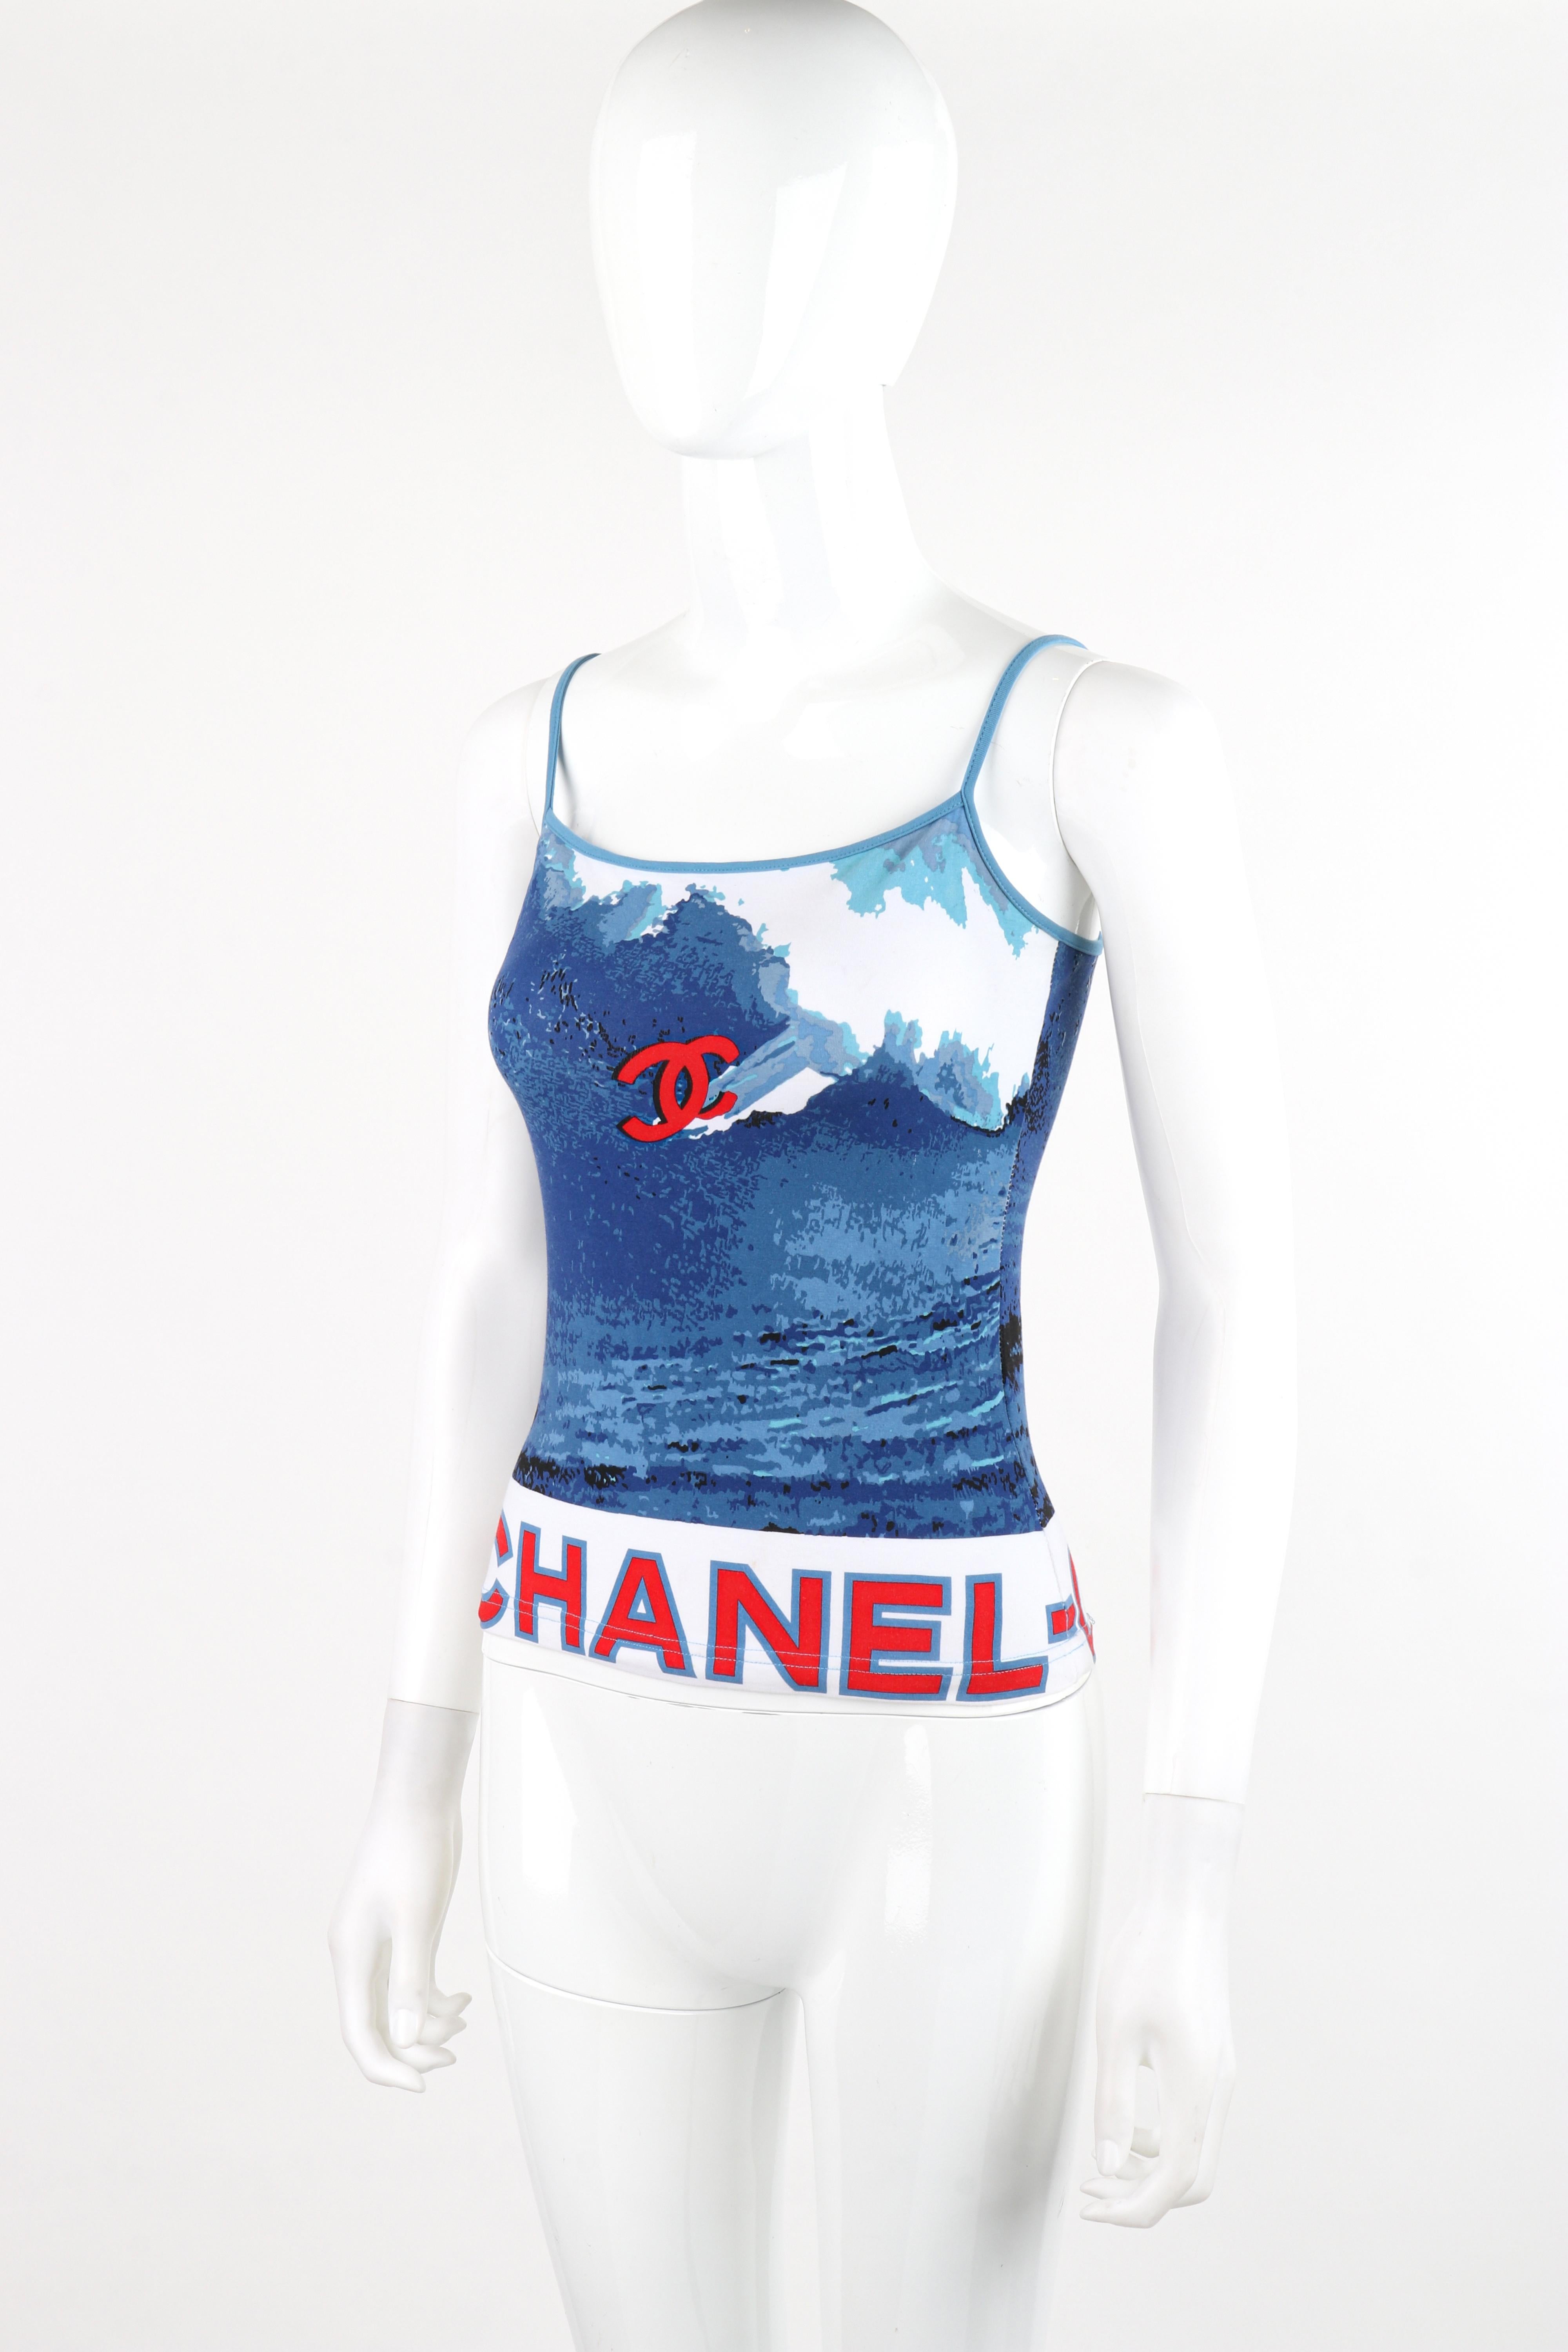 CHANEL 2002 Red White Blue CC Surf Wave Print Stretch Elastic Strap Tank Top For Sale 2